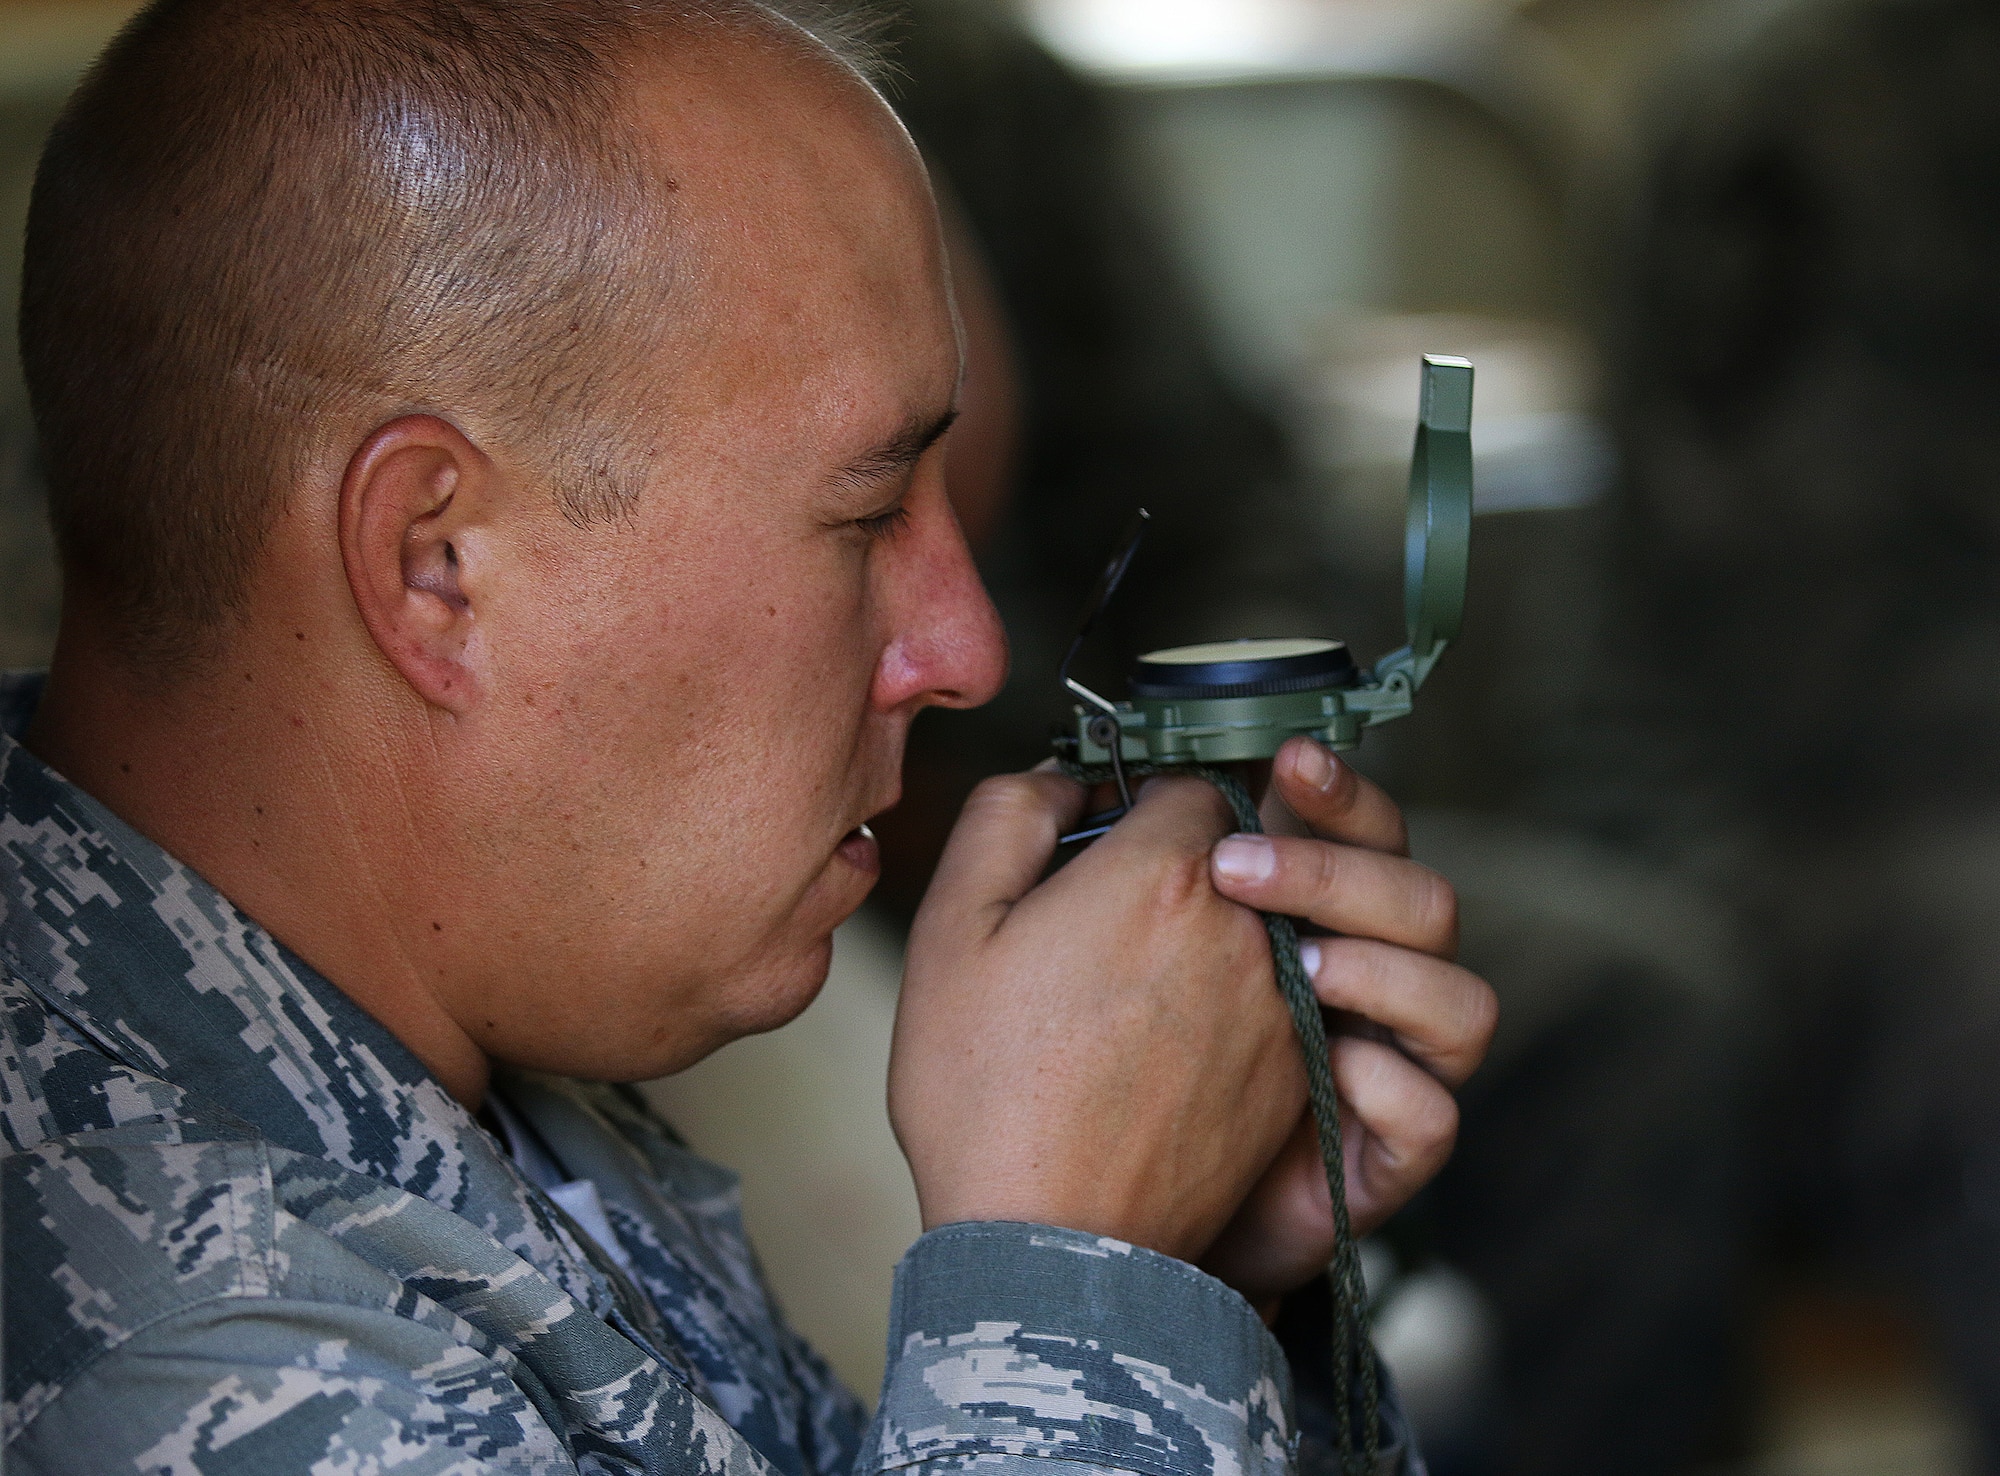 WRIGHT-PATTERSON AIR FORCE BASE, Ohio – Technical Sgt. Joseph S. Poorman, 445th Civil Engineering Squadron, reads a compass during Land Navigation training at the Warfighter Training Center Sept. 13, 2015. During the three days of training, service members covered a wide array of topics ranging from tent set-up, damage assessment response, and land navigation, to radio communications, attack preparation, and self-aid buddy care. (U.S. Air Force photo /Tech. Sgt. Patrick O’Reilly)